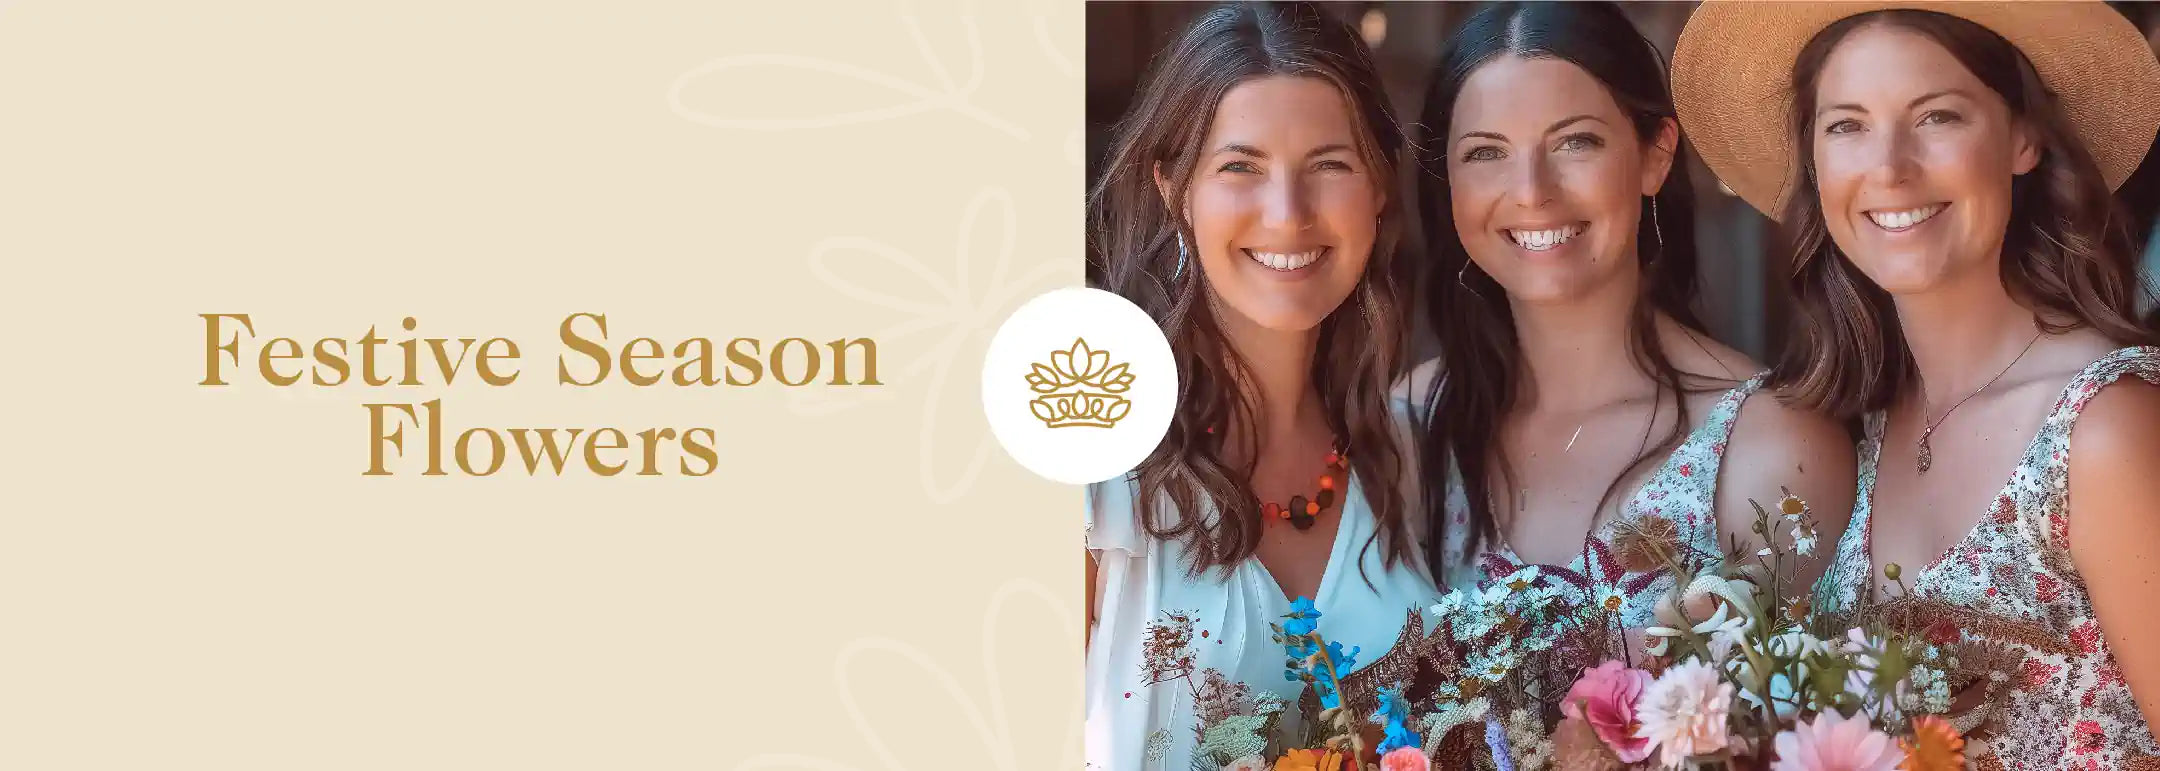 Three cheerful women holding a vibrant assortment of festive season flowers, dressed in summer outfits and smiling warmly. The image highlights the Festive Season Flowers Collection, showcasing a heartfelt and personal delivery approach. Fabulous Flowers and Gifts.